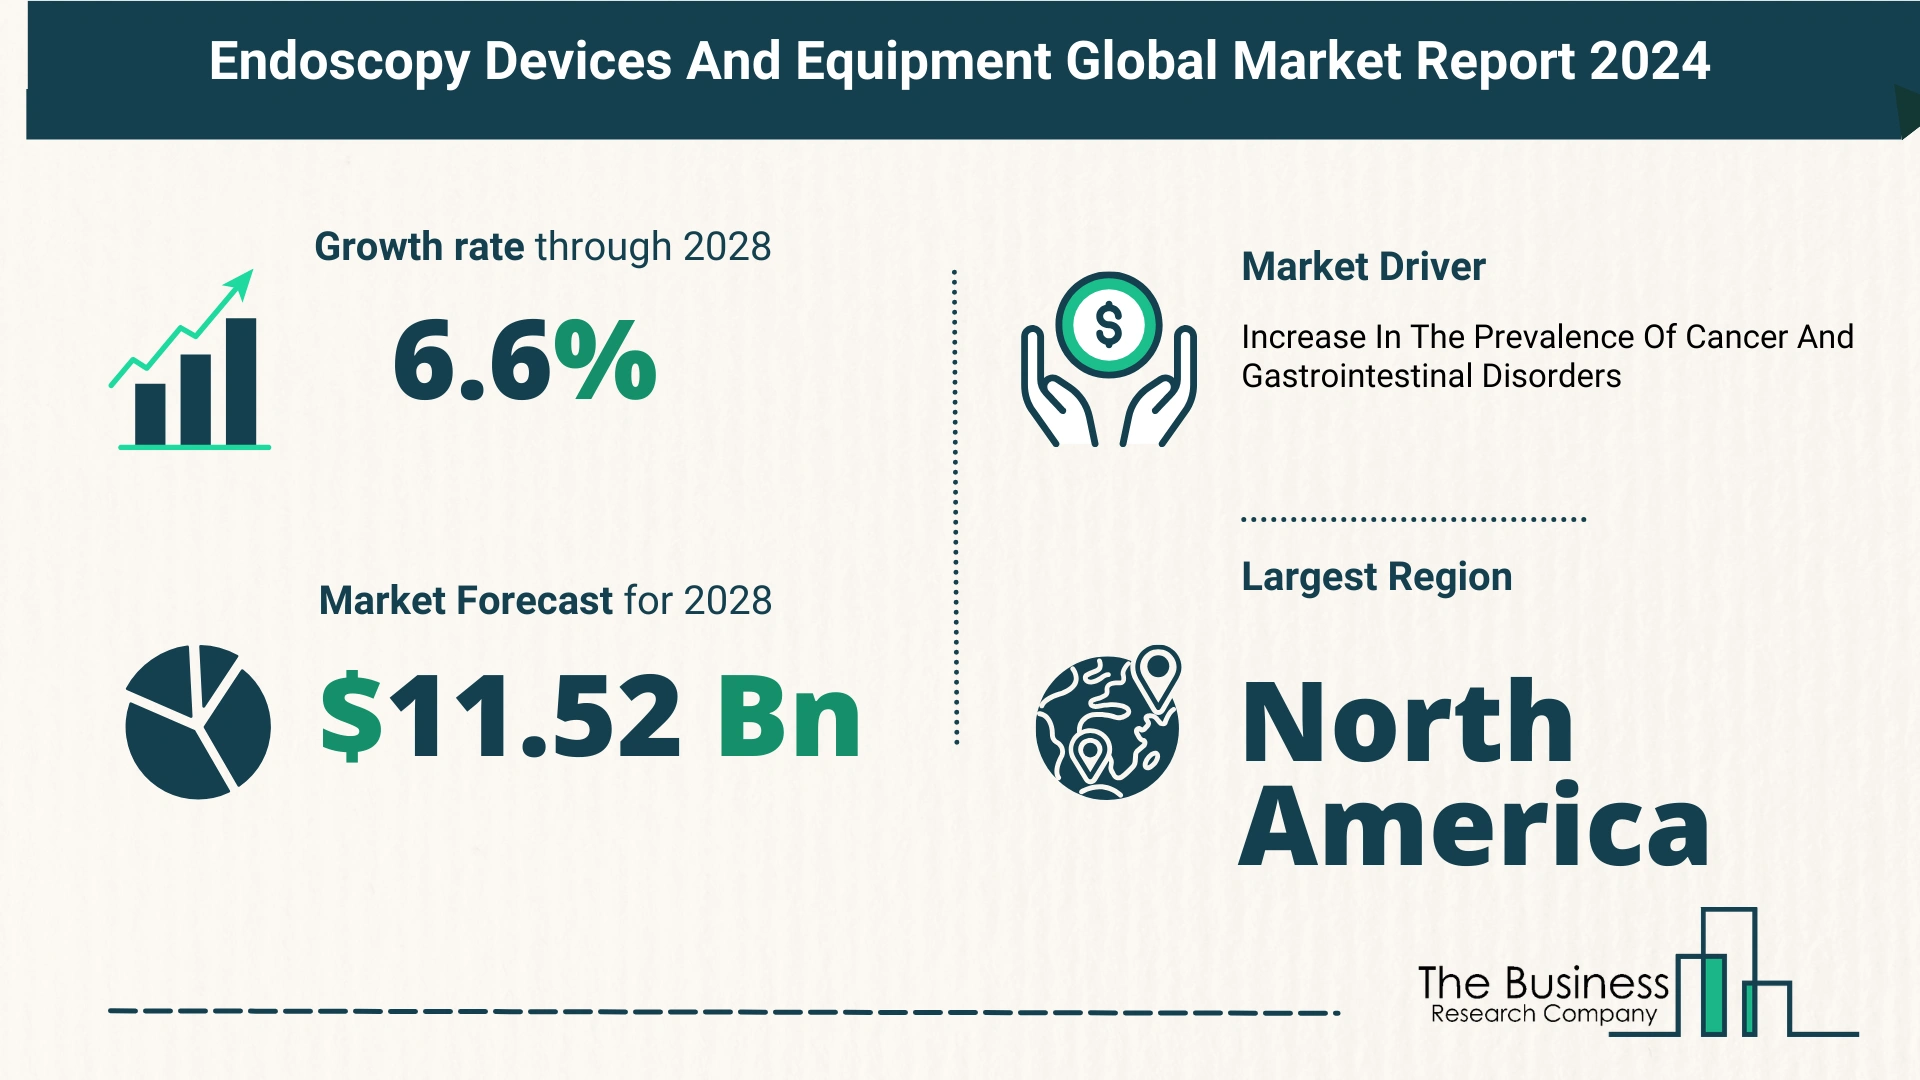 Global Endoscopy Devices And Equipment Market Size